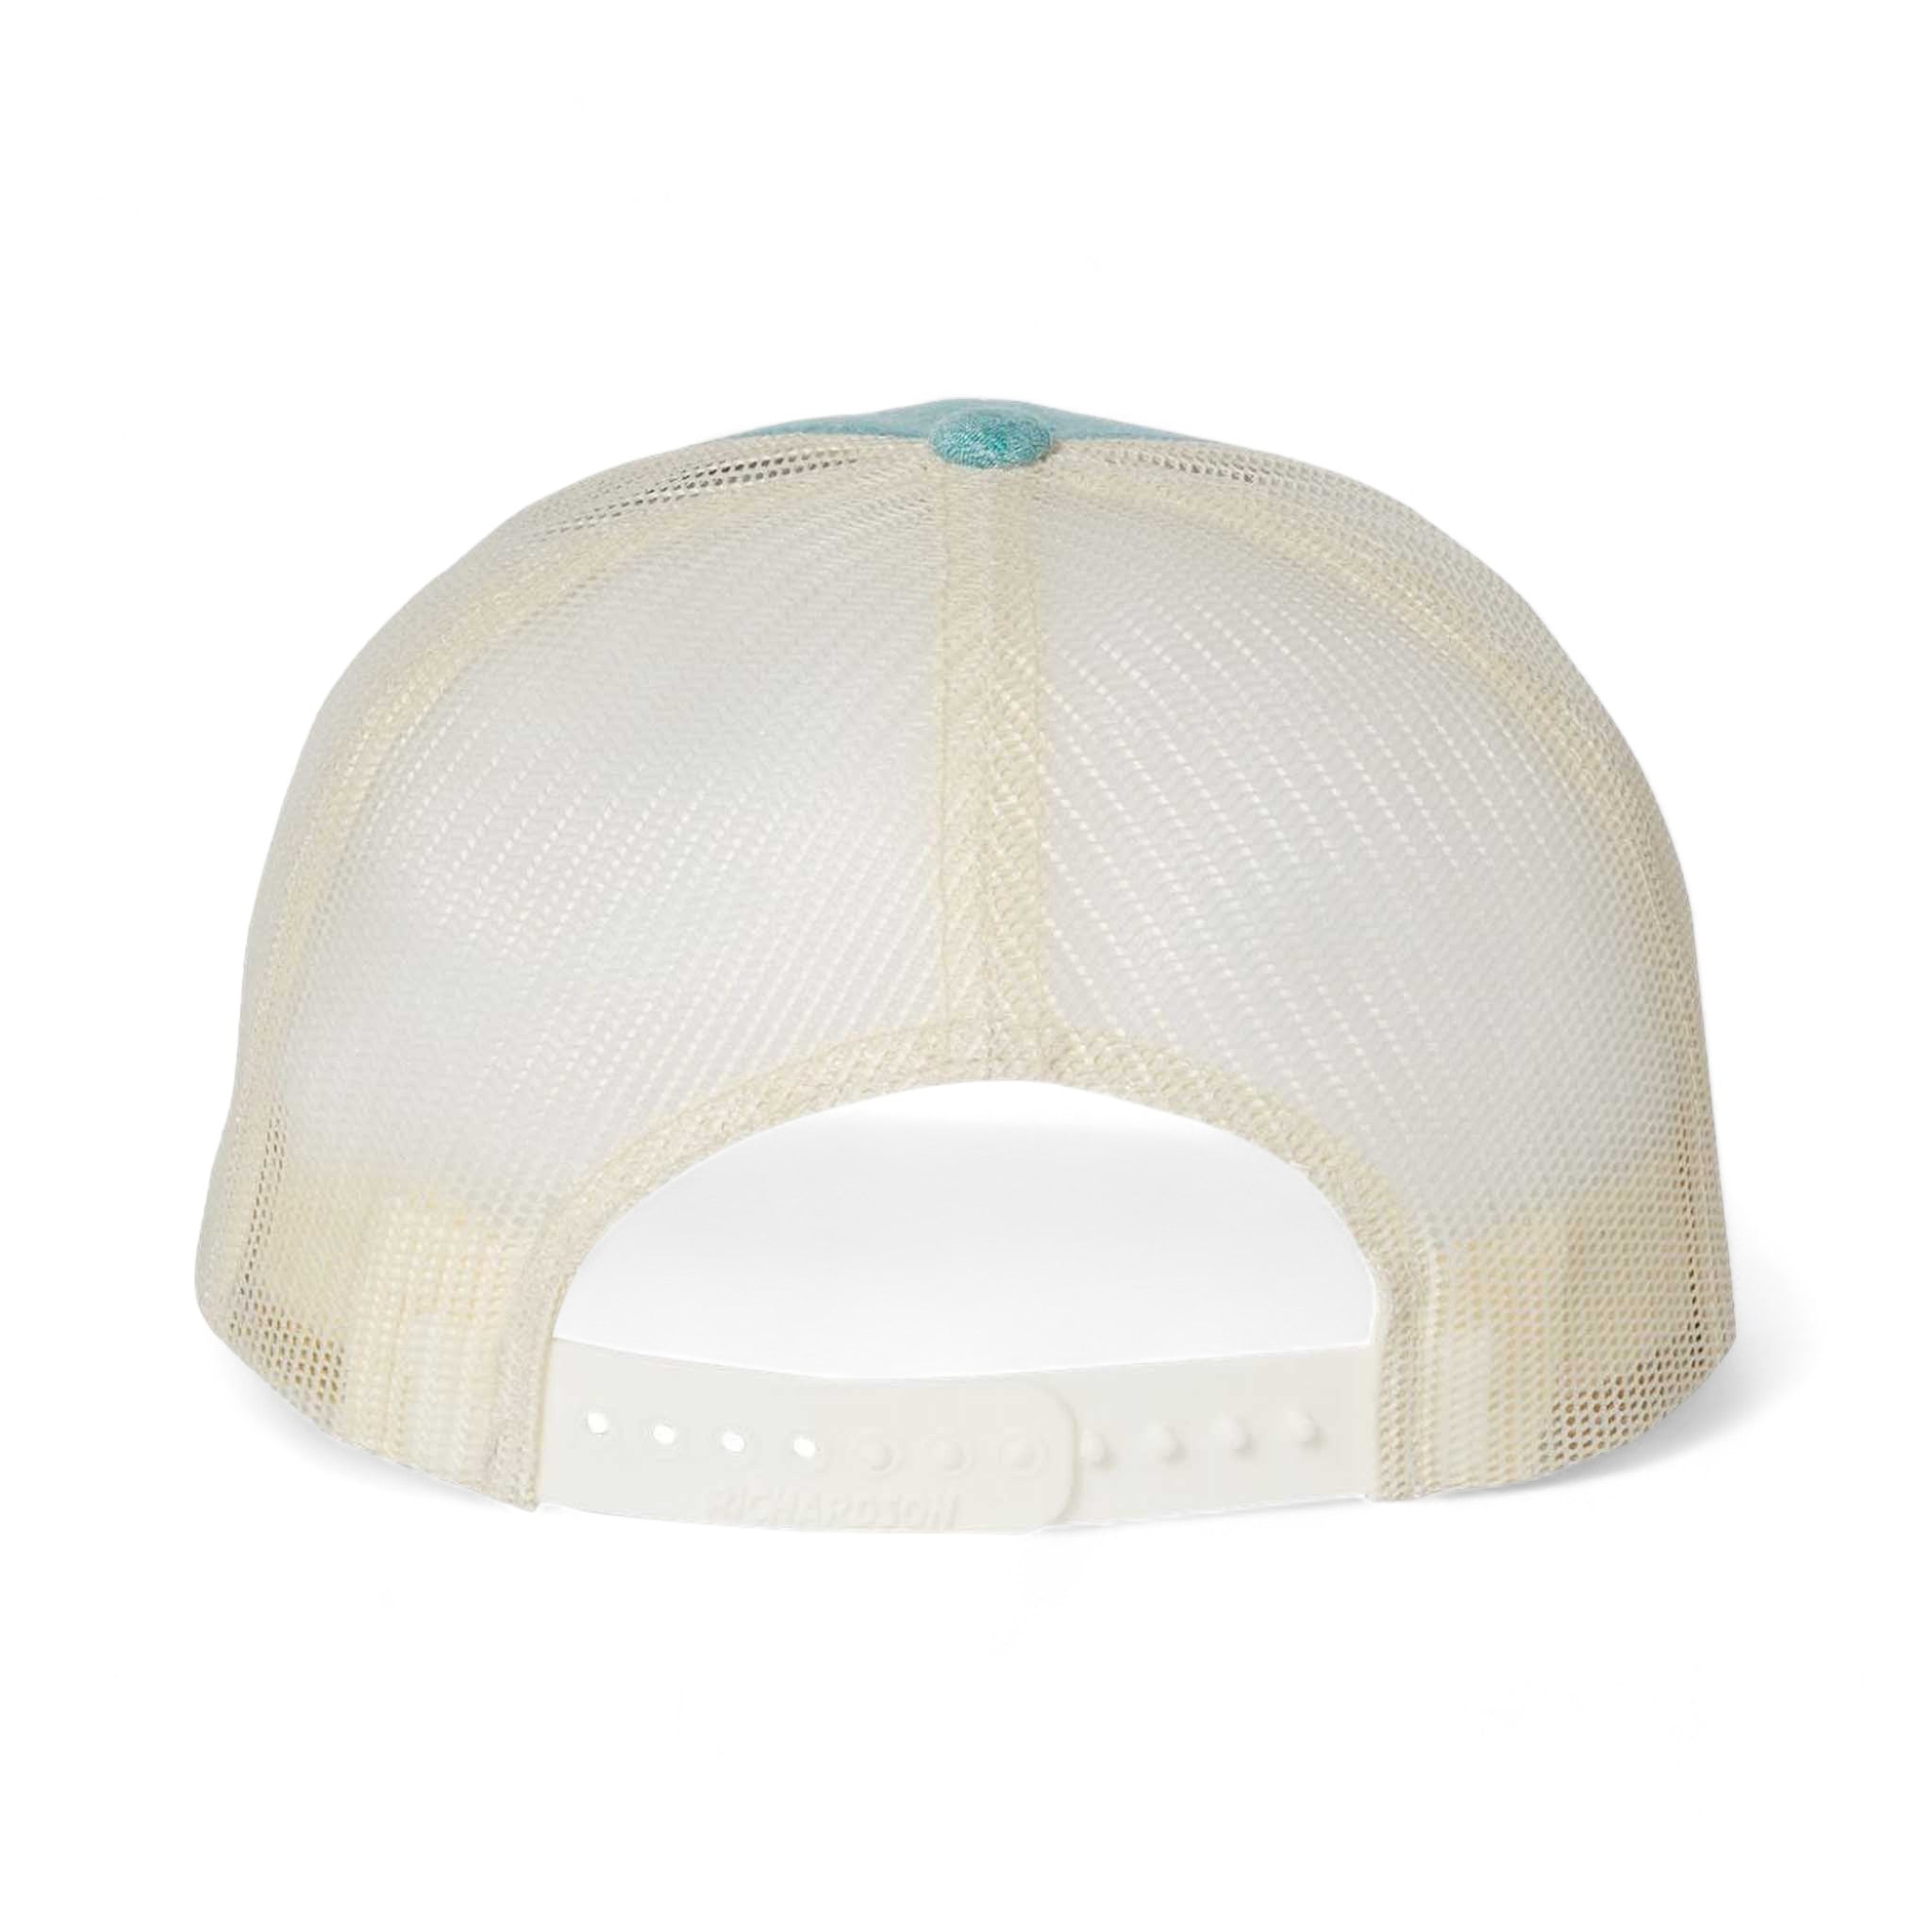 Back view of Richardson 115CH custom hat in green teal heather and birch